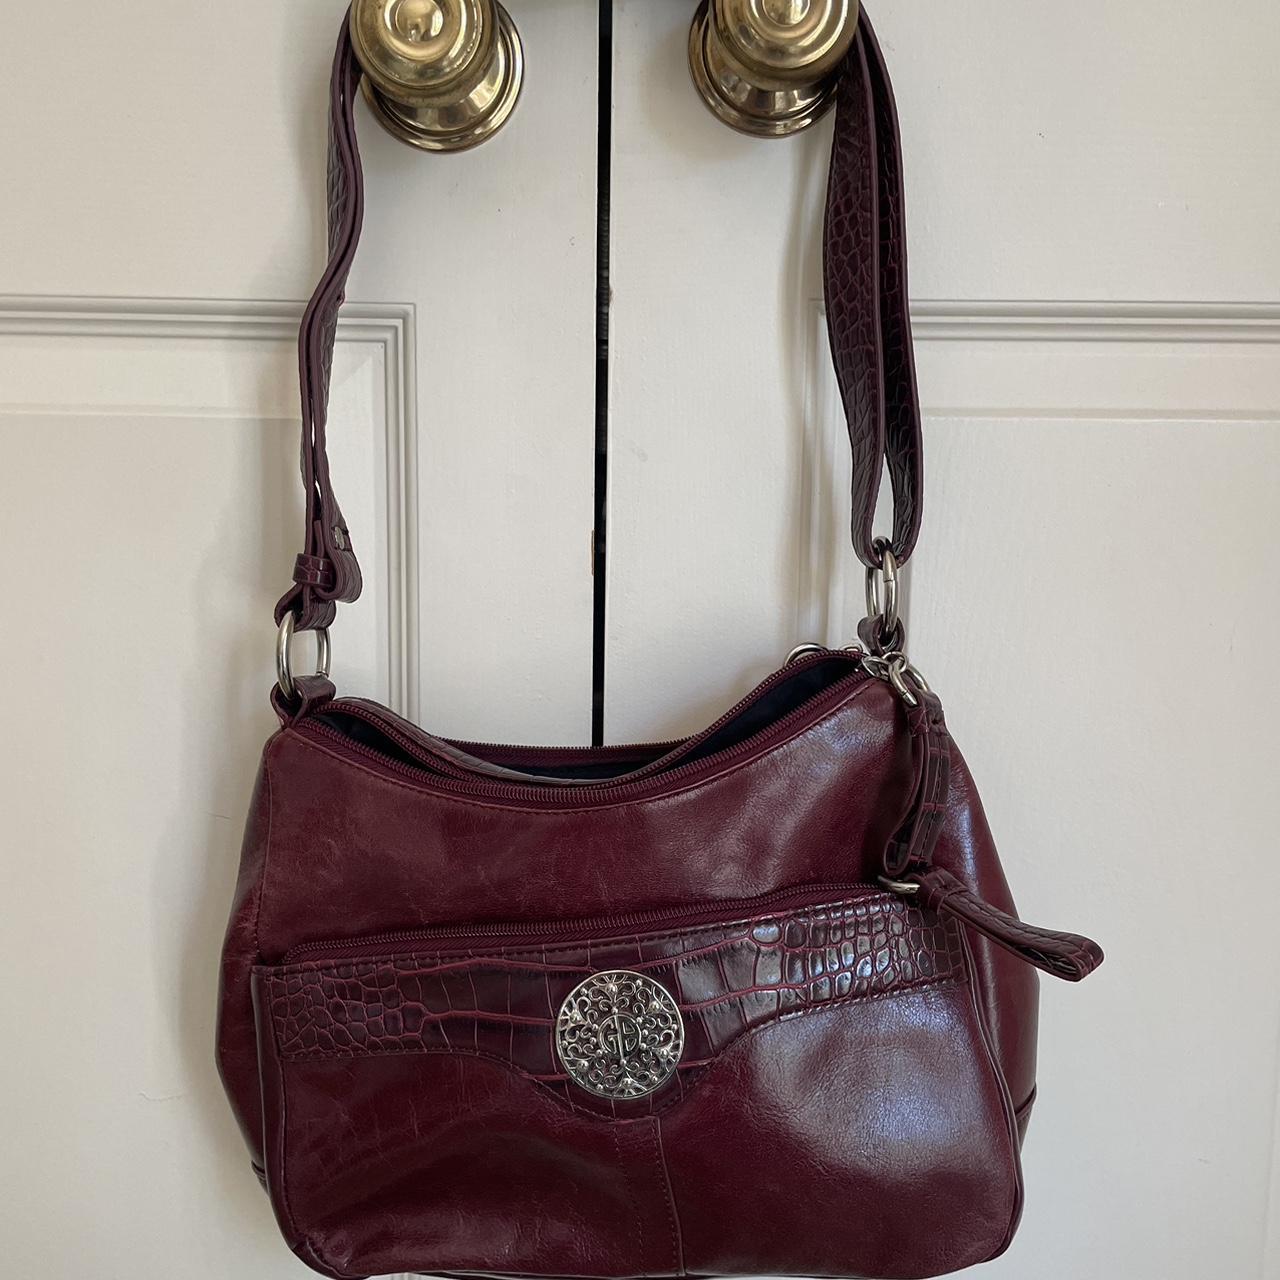 Best Giani Bernini Purse New With Tag for sale in Fremont, California for  2024